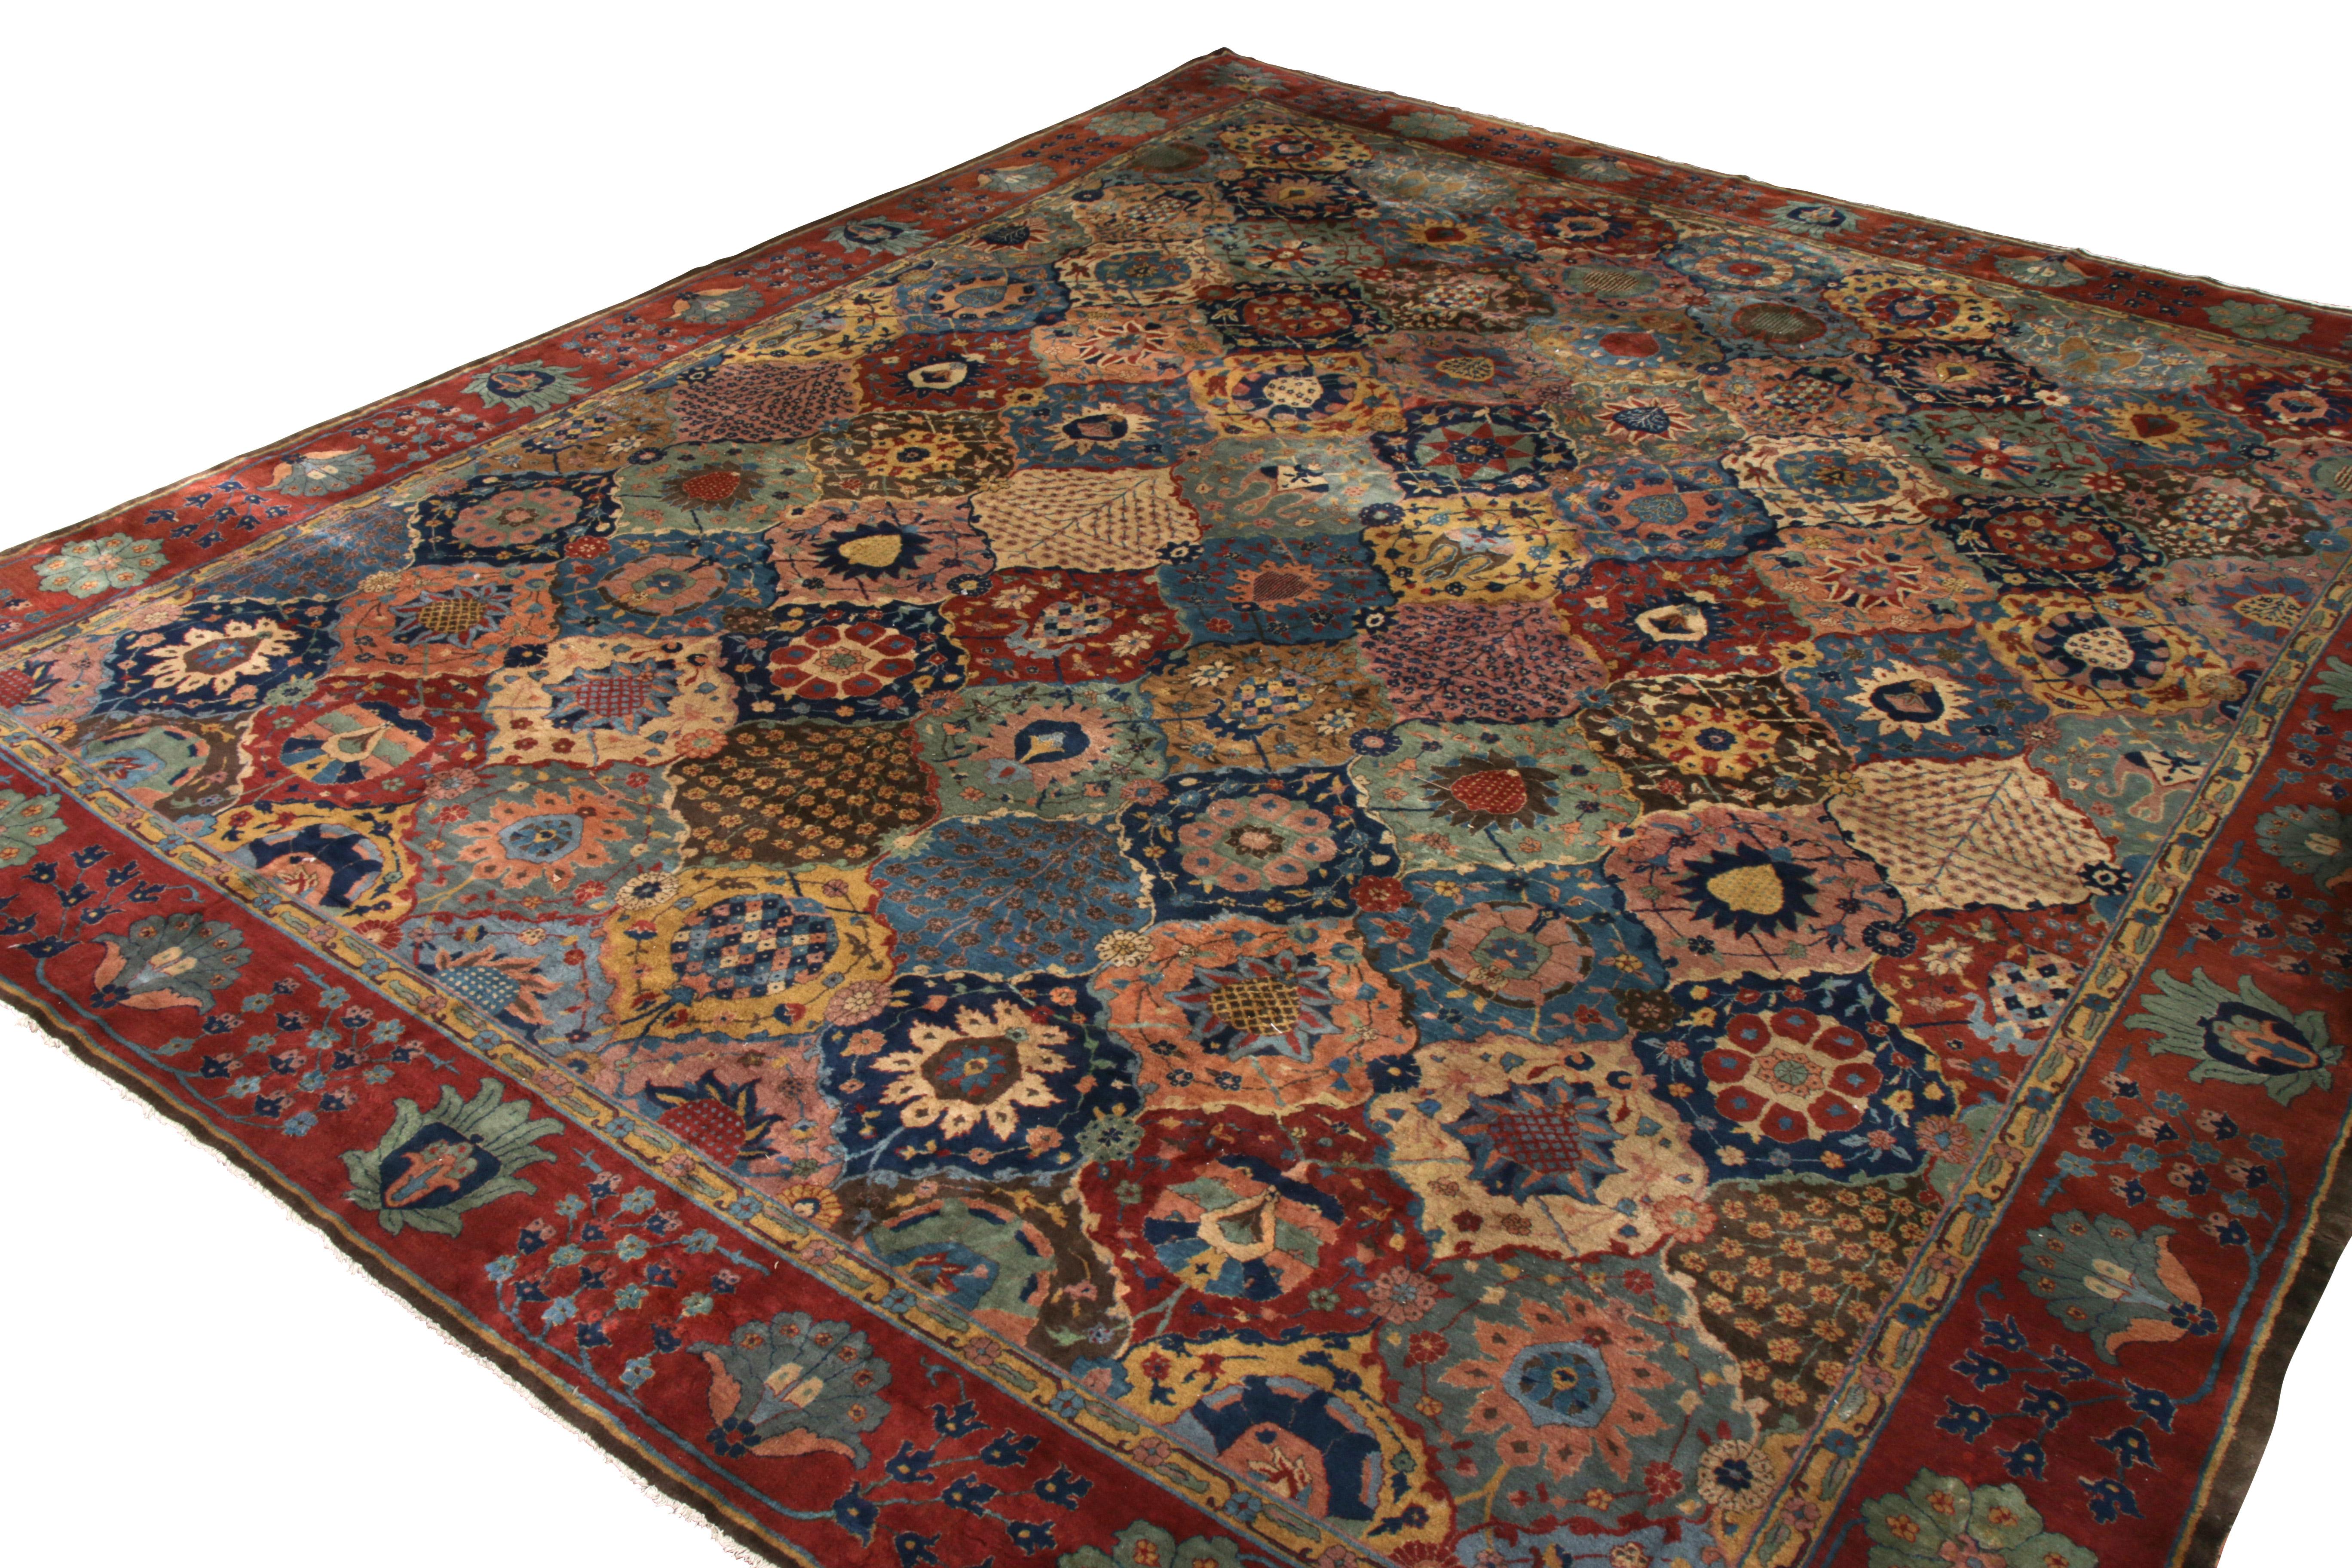 Hand-knotted antique Agra rug in blue and red floral pattern.
Description: Hand knotted in wool originating from India circa 1900-1910, this 15 x 18 antique rug connotes a transitional Agra rug of a notably rare design, enjoying a beautifully